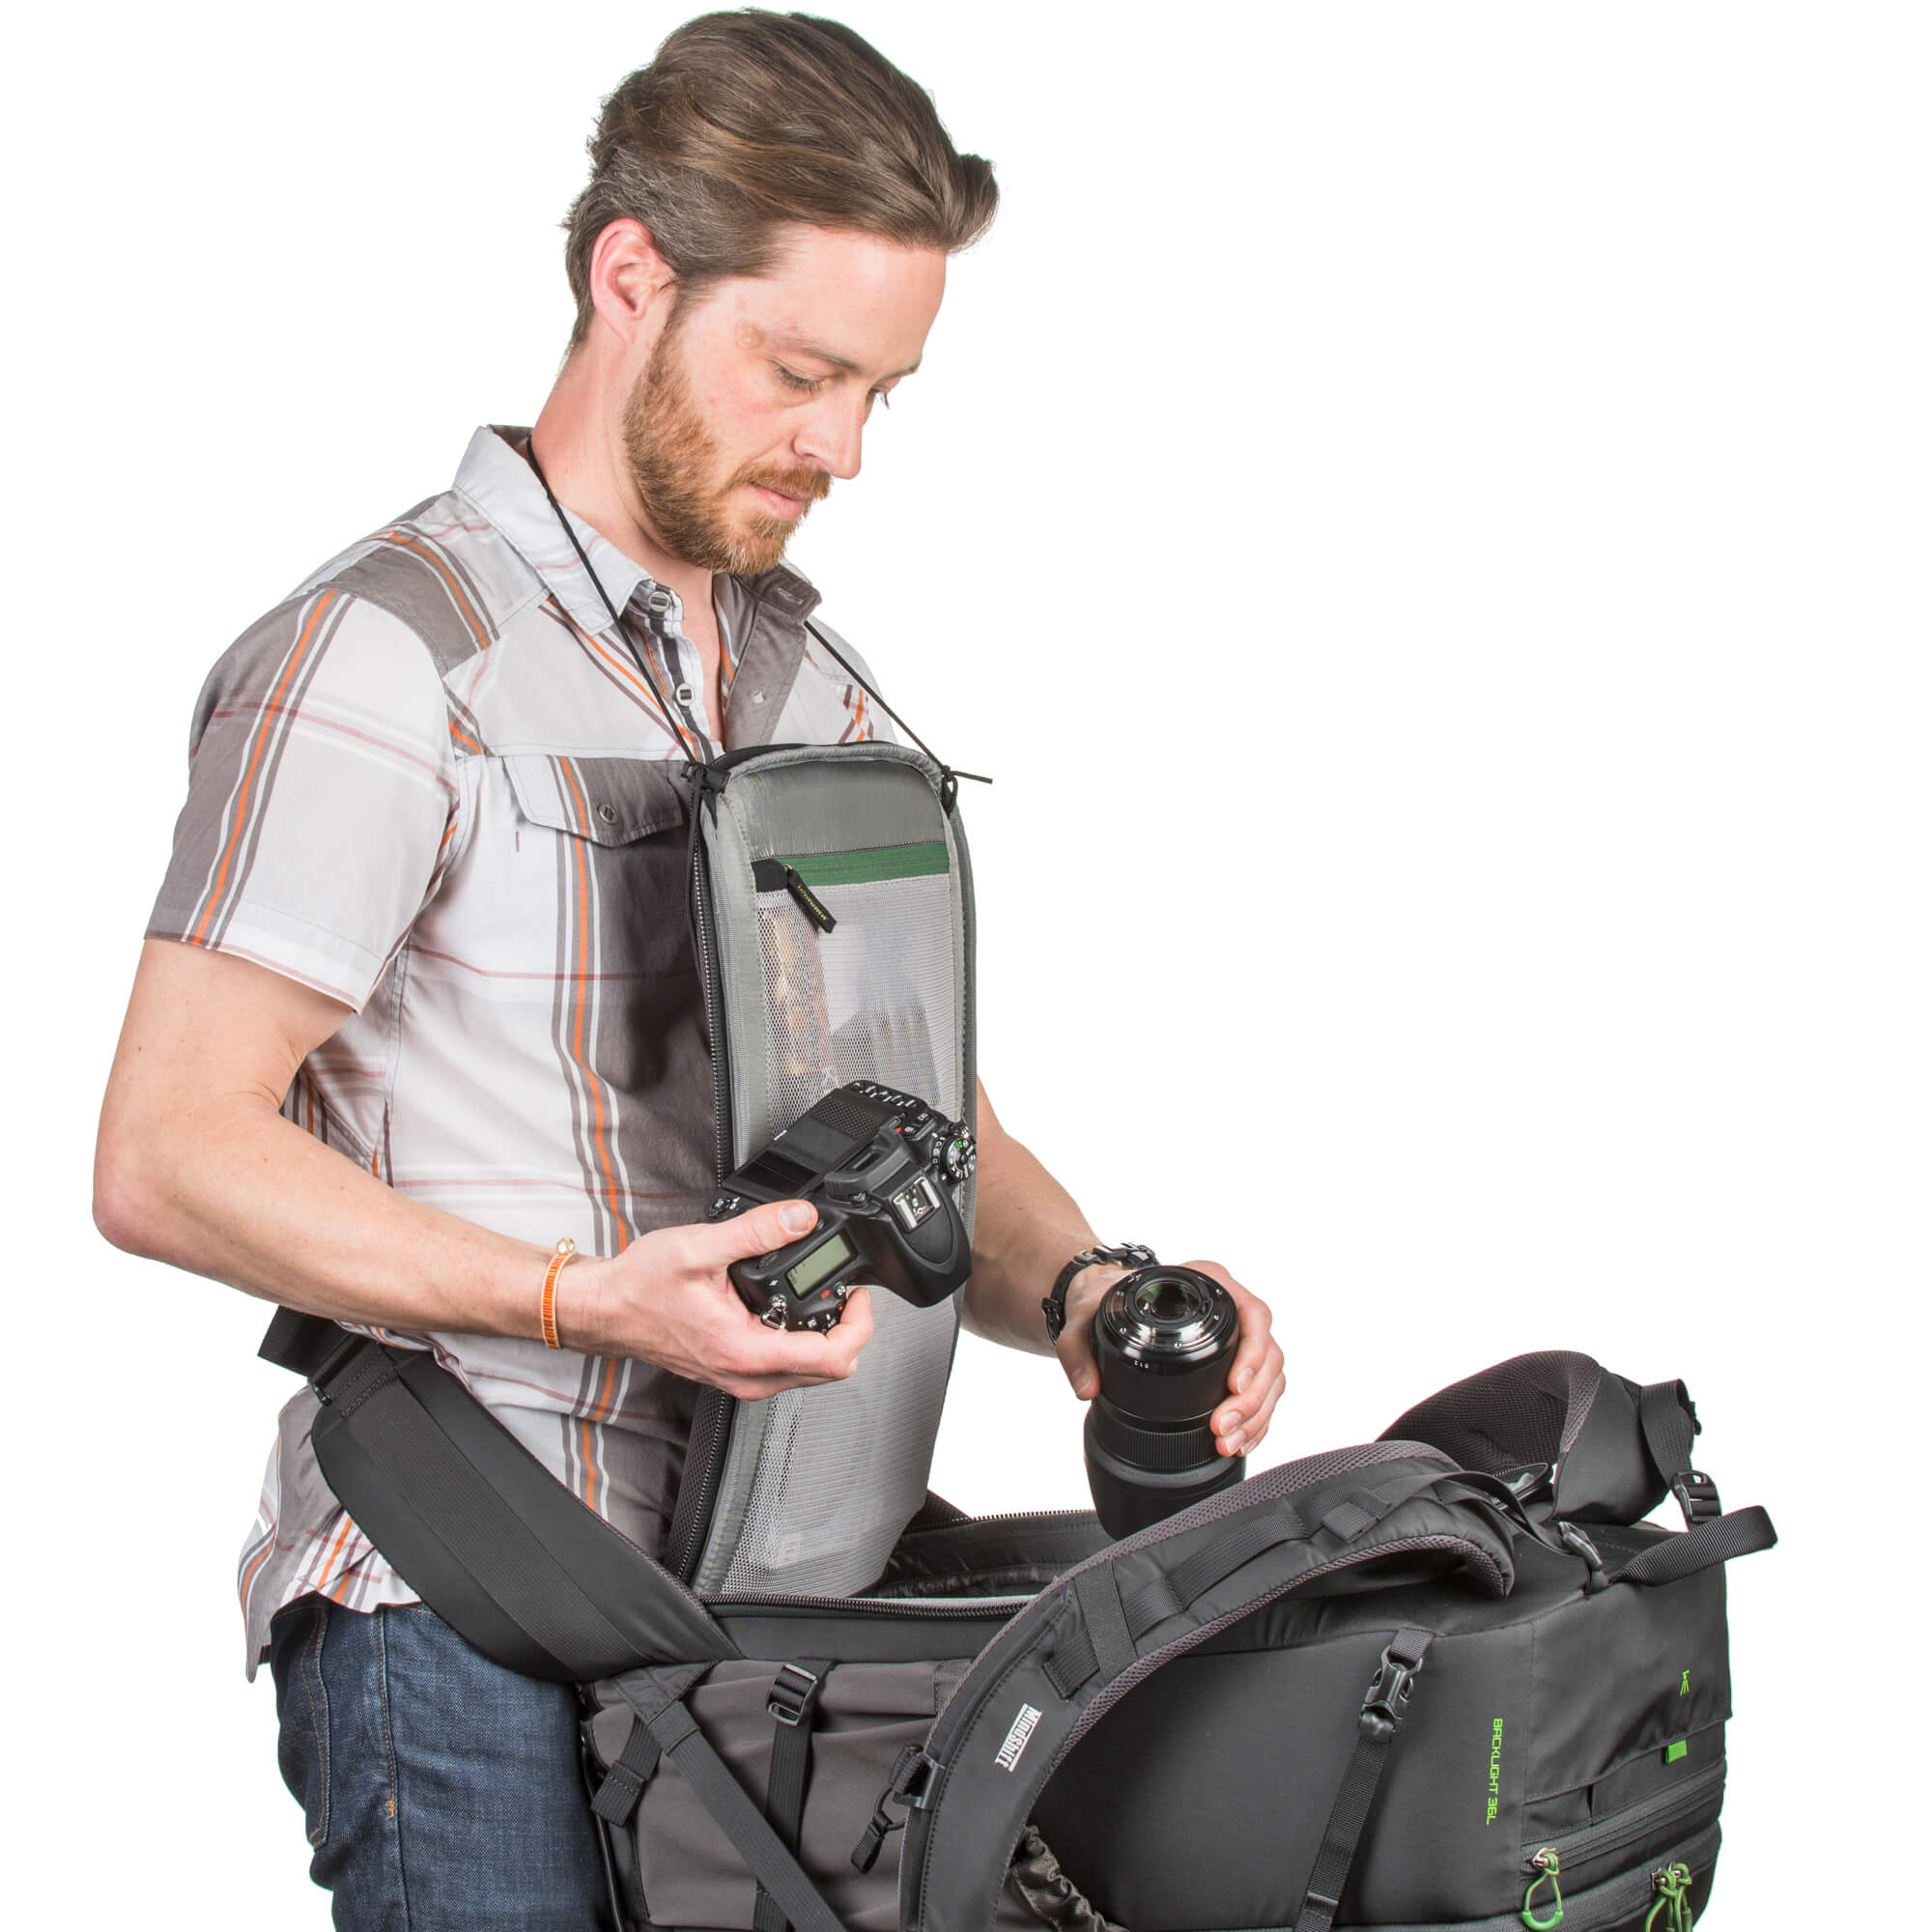 Back-panel opening provides access to all of your camera gear without taking the pack off, allowing you to work out of the bag without getting your harness dirty, wet, muddy or icy. 